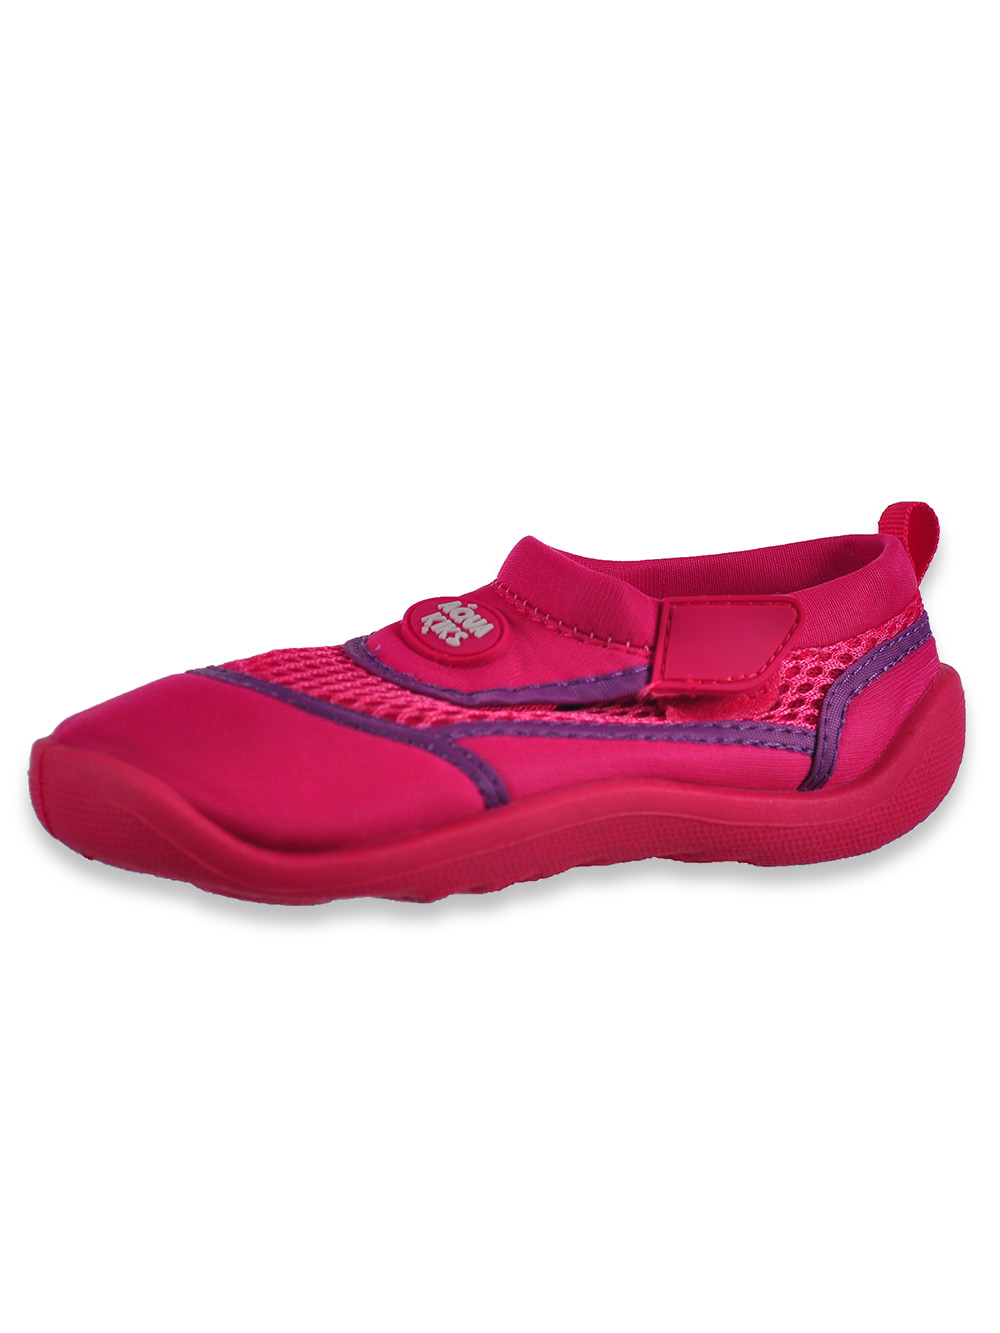 Girls' Water Swim Shoes by Aquakiks in 